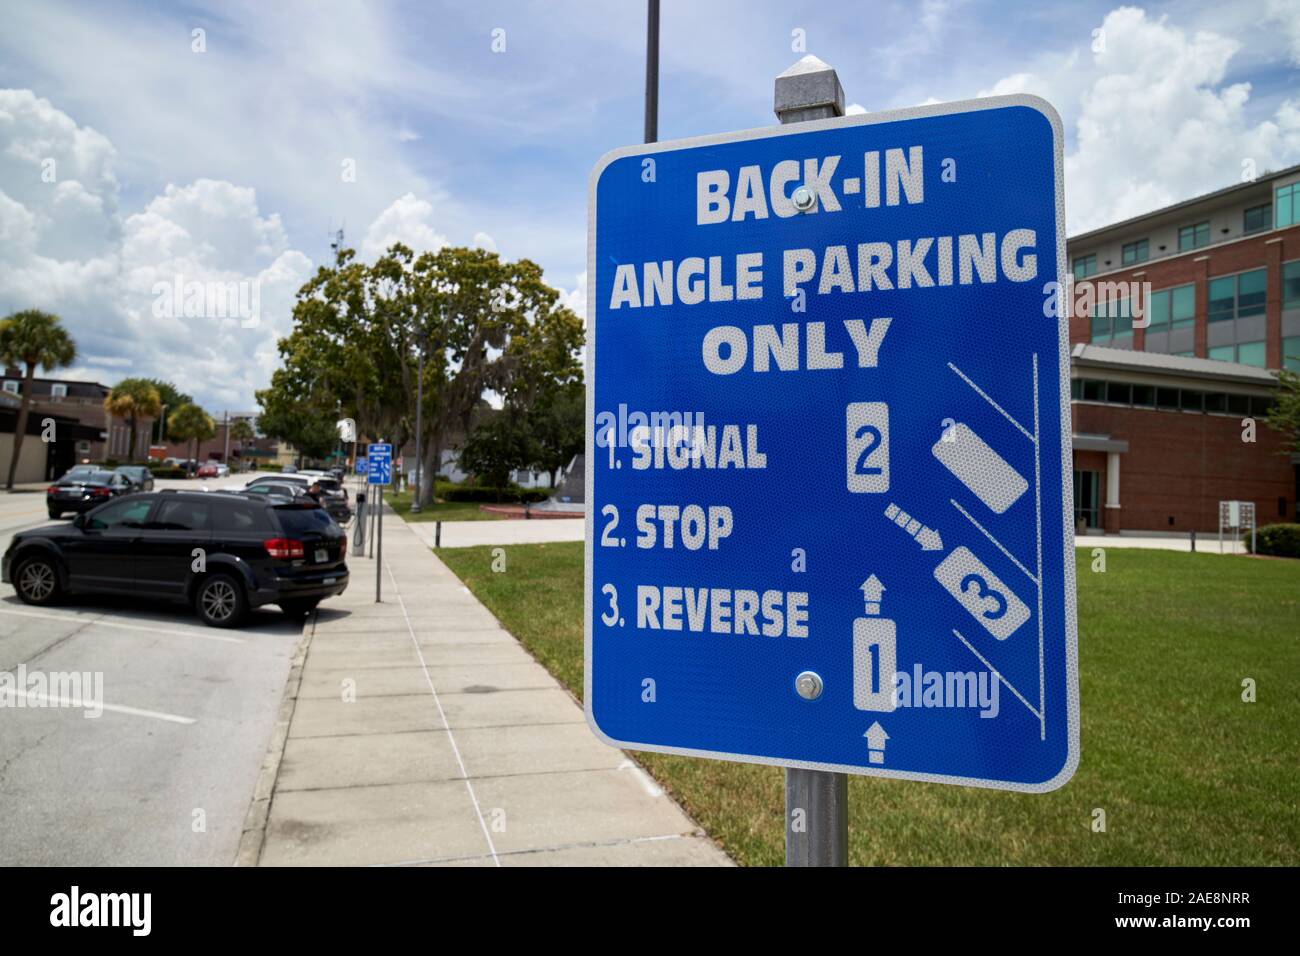 back-in angle parking only on street kissimmee florida usa Stock Photo